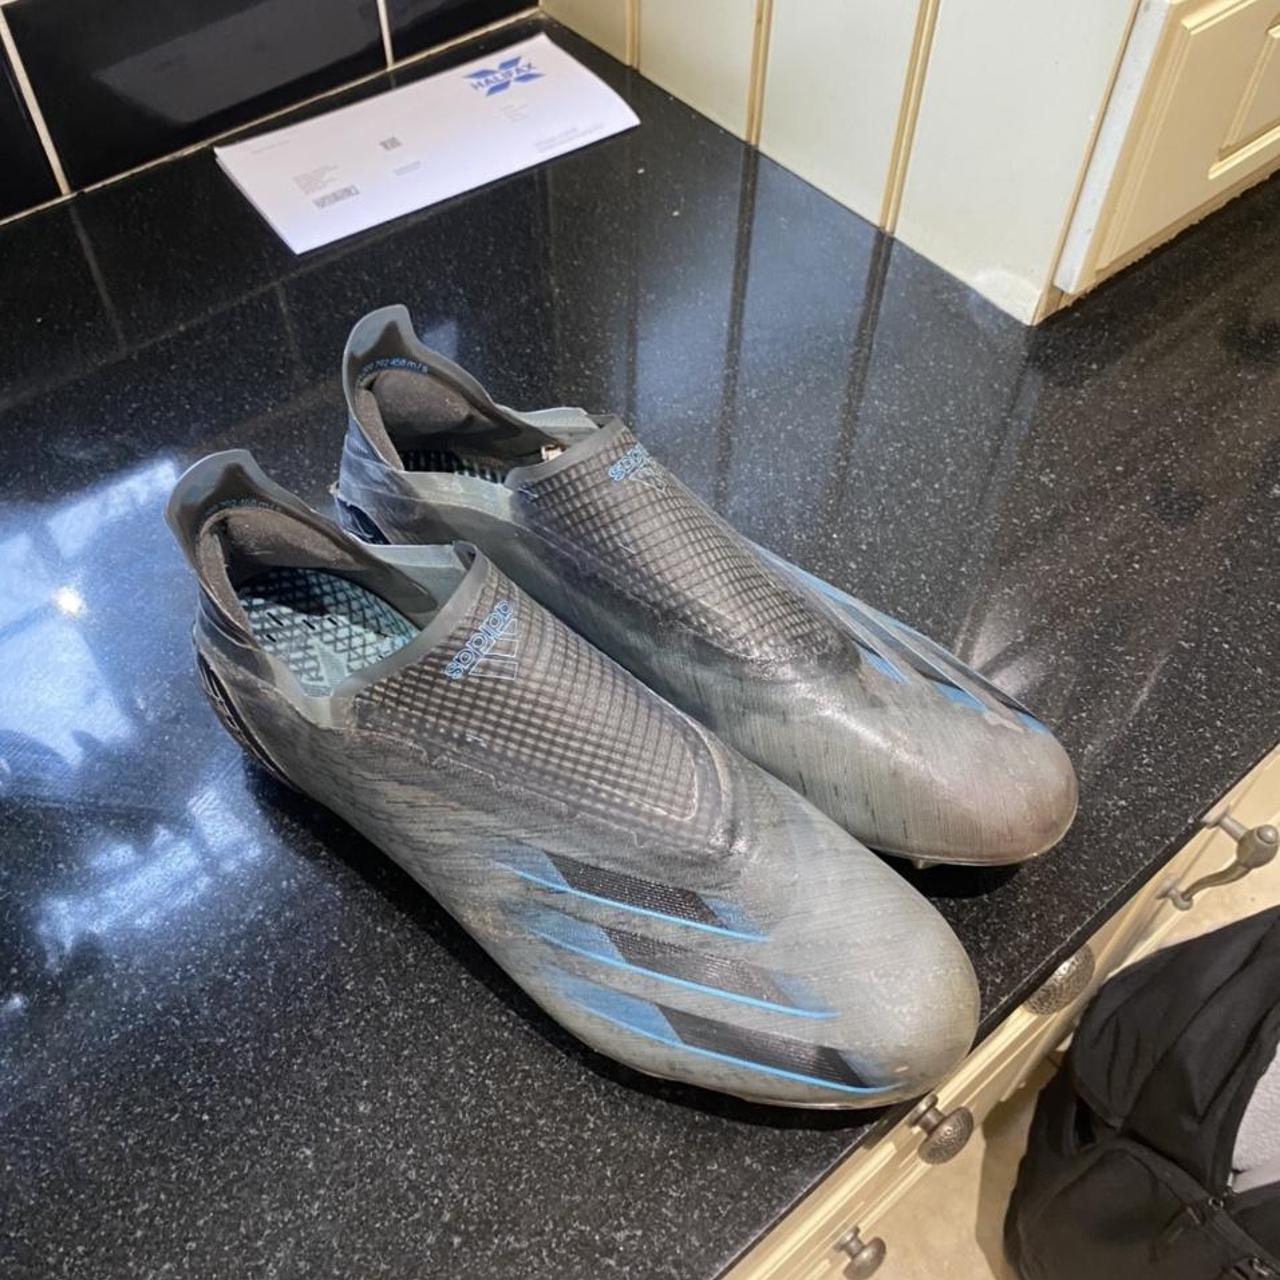 Adidas X ghosted + Size 11 Reason for sale - too... - Depop